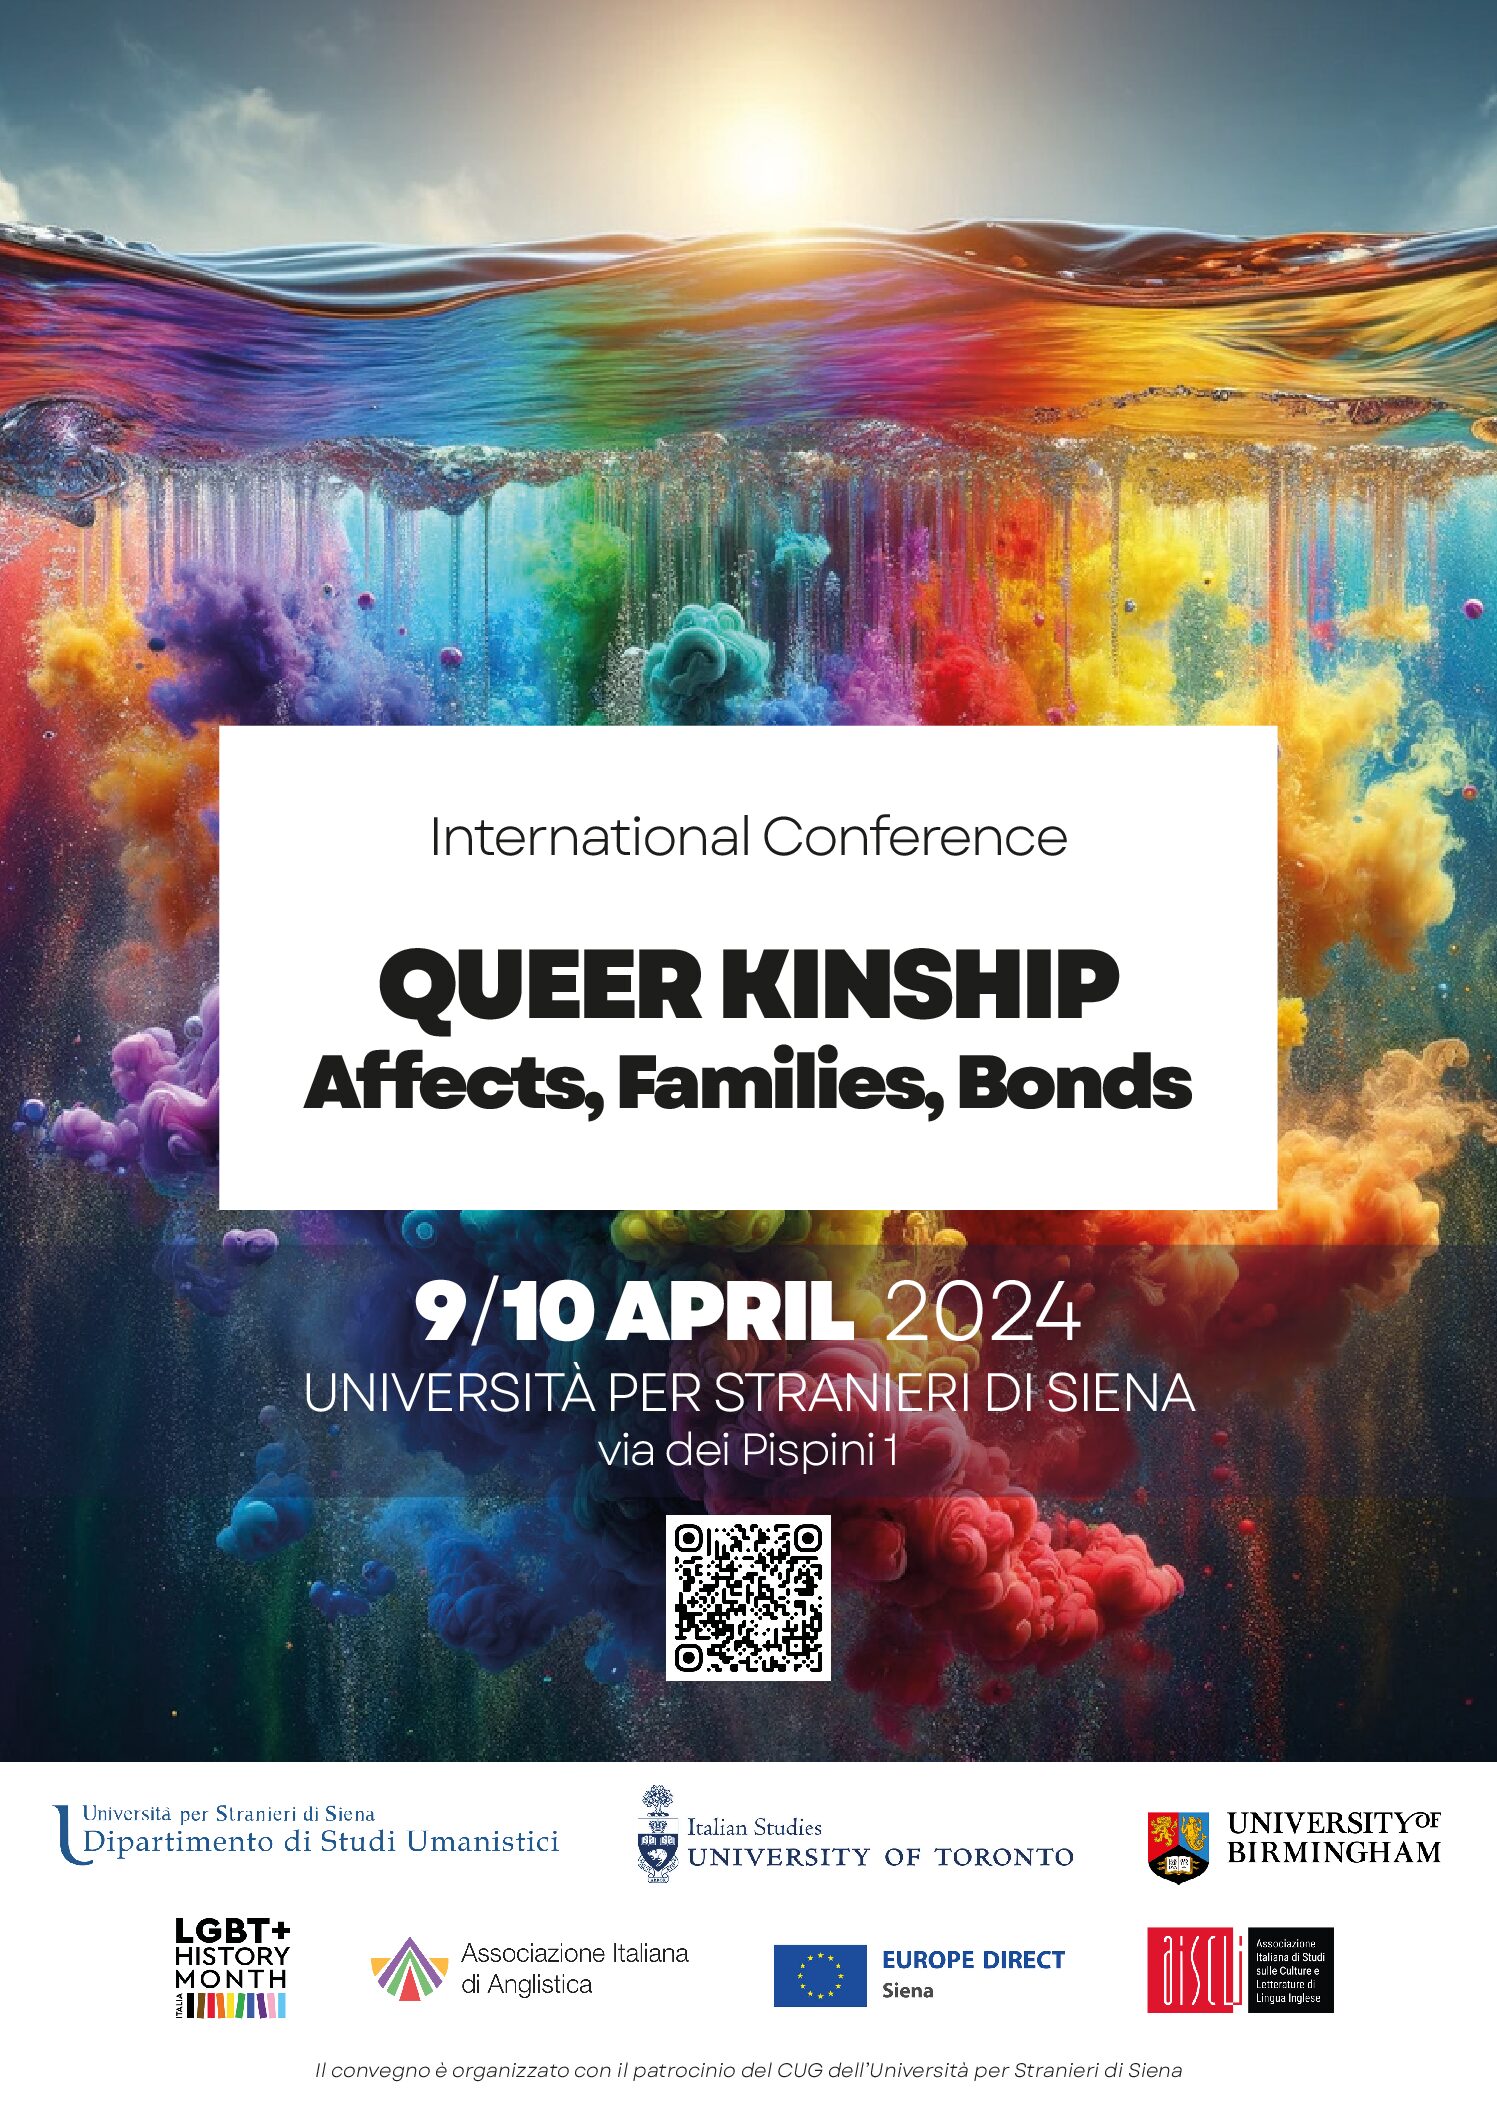 International Conference – QUEER KINSHIP: Affects, Families, Bonds